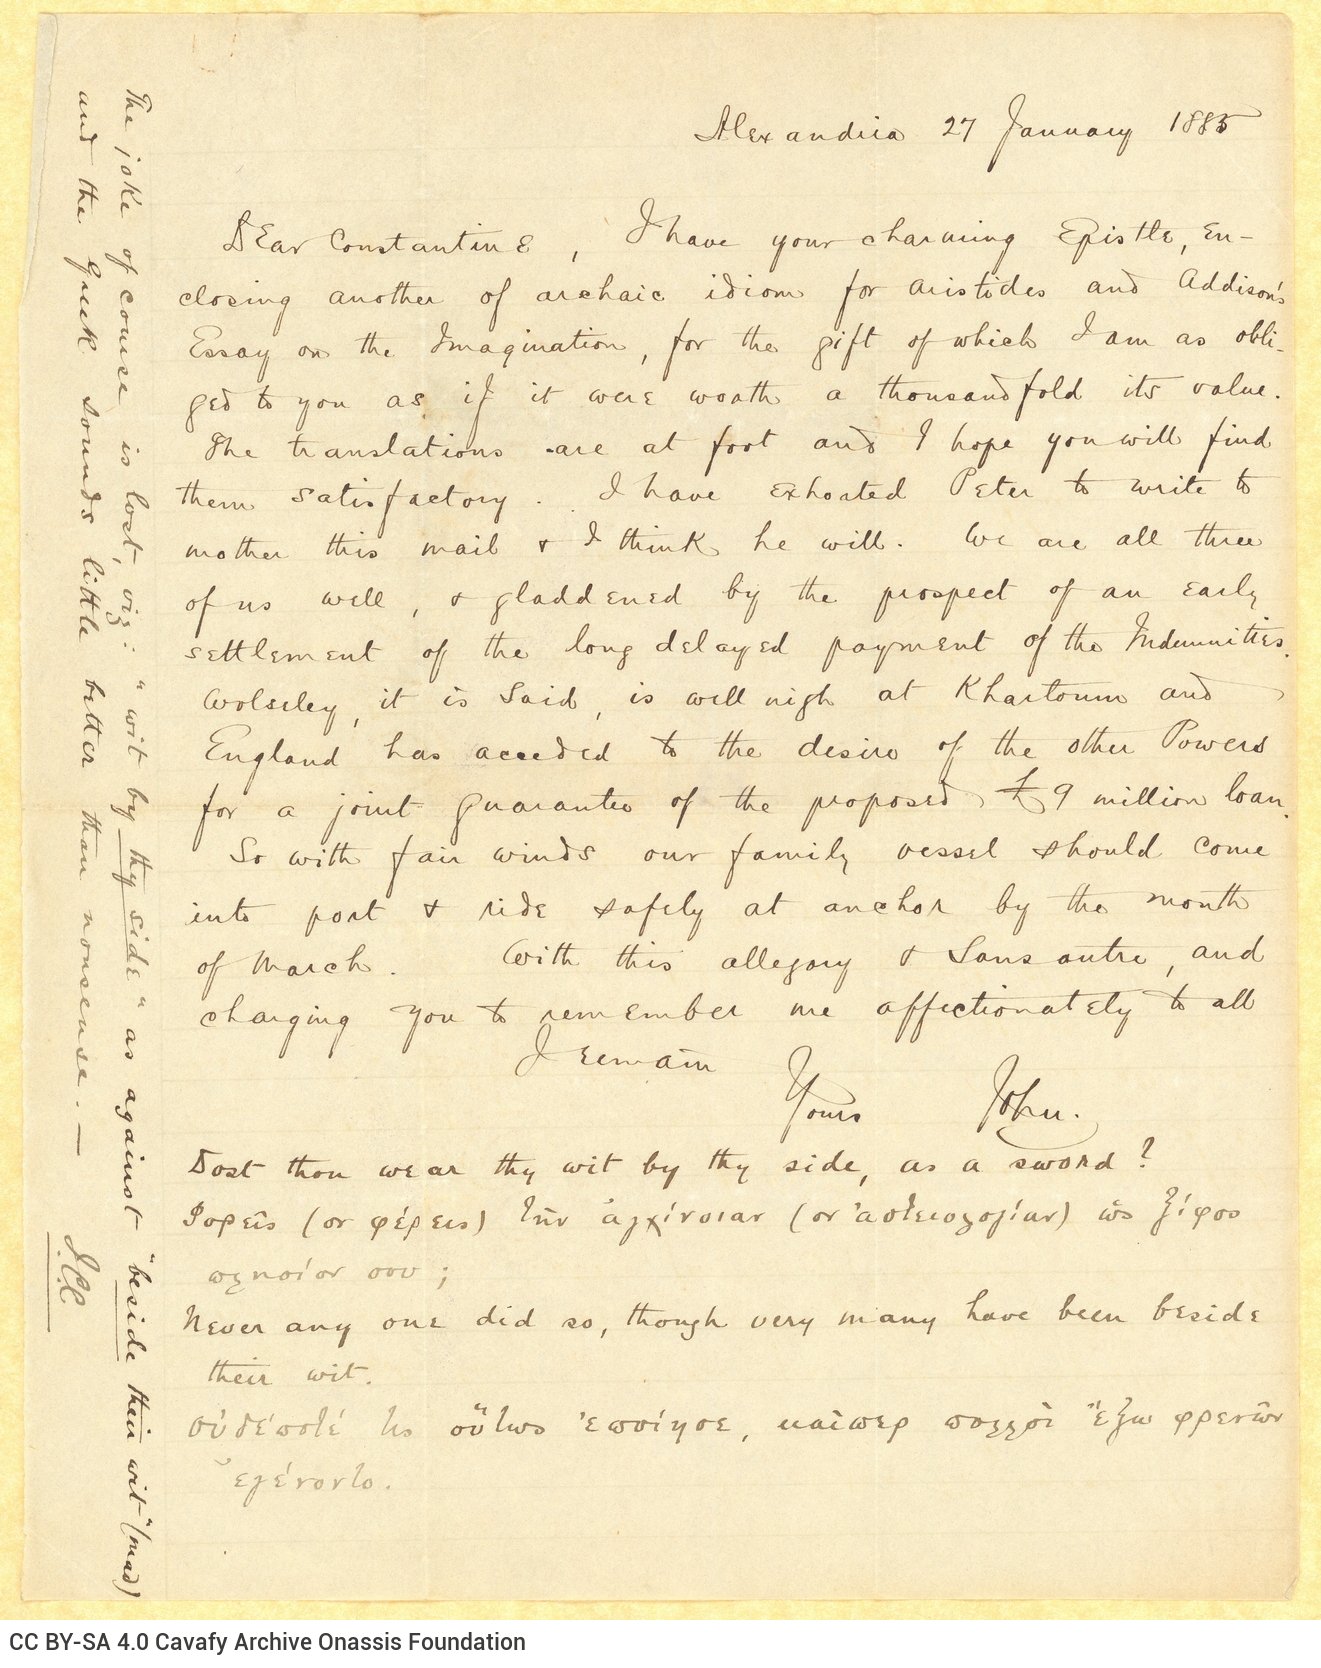 Handwritten letter by John Cavafy to C. P. Cavafy on one side of a ruled sheet. Blank verso. Prospect for payment of indem